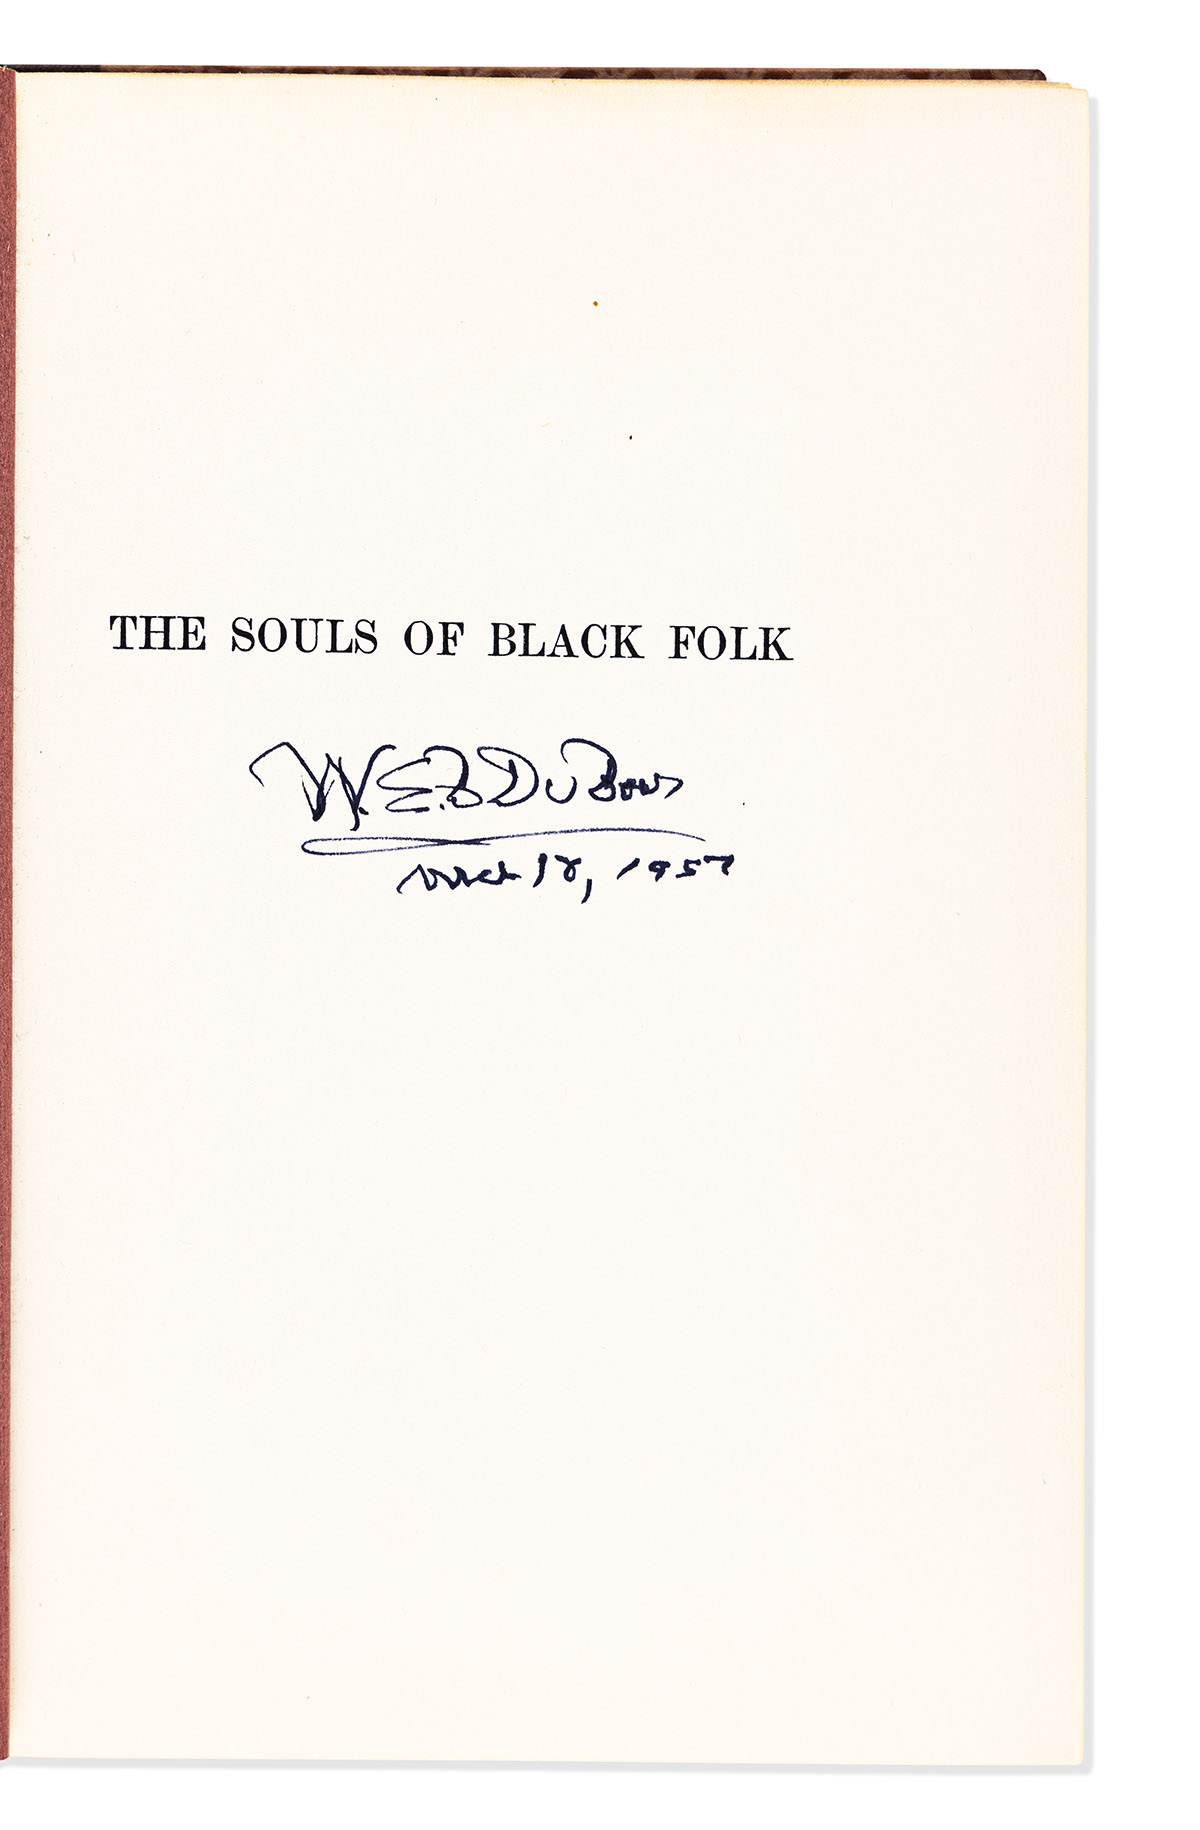 DU BOIS, W.E.B. The Souls of Black Folk. Signed and dated, on the half-title.